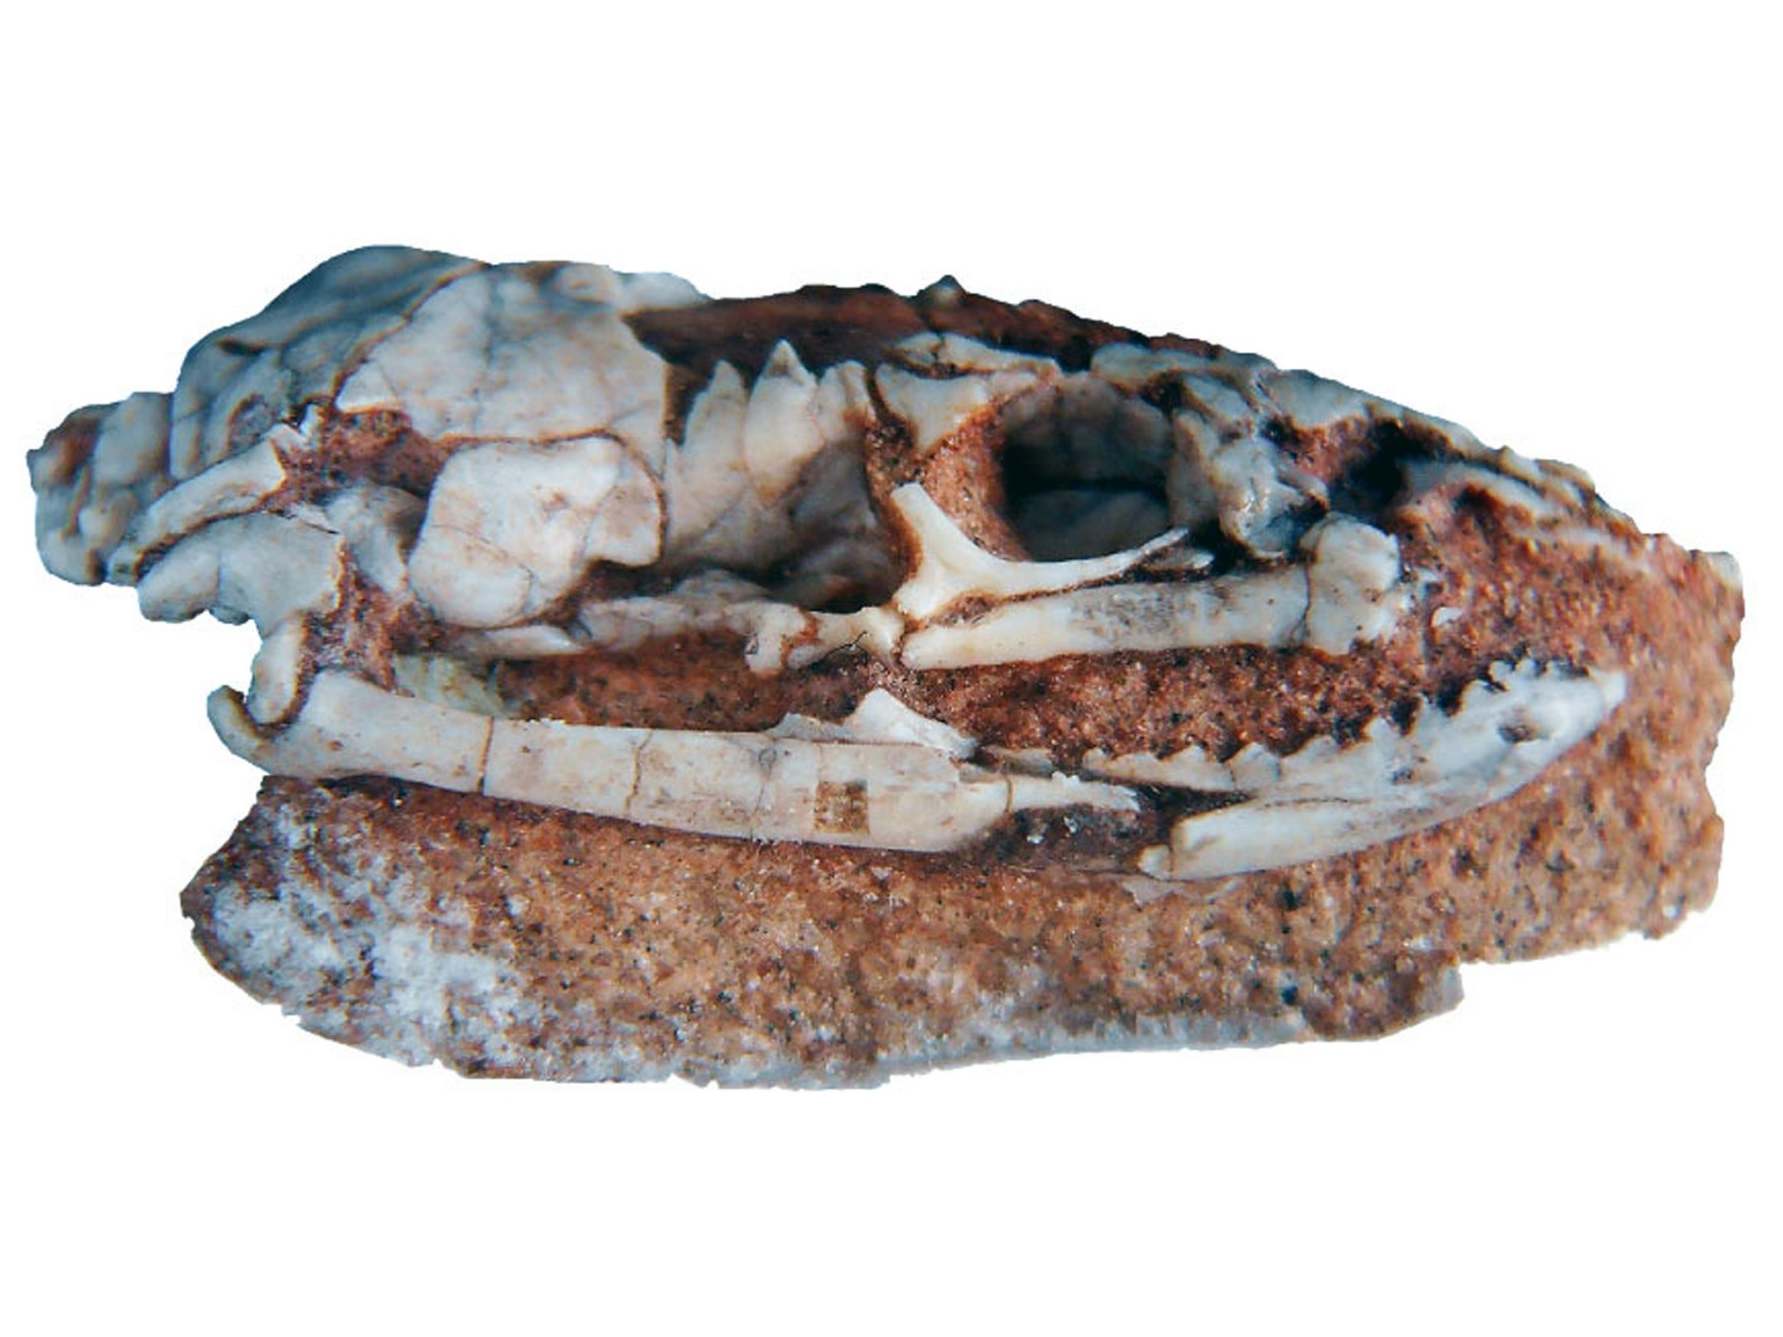 This find is the most complete Mesozoic snake skull known